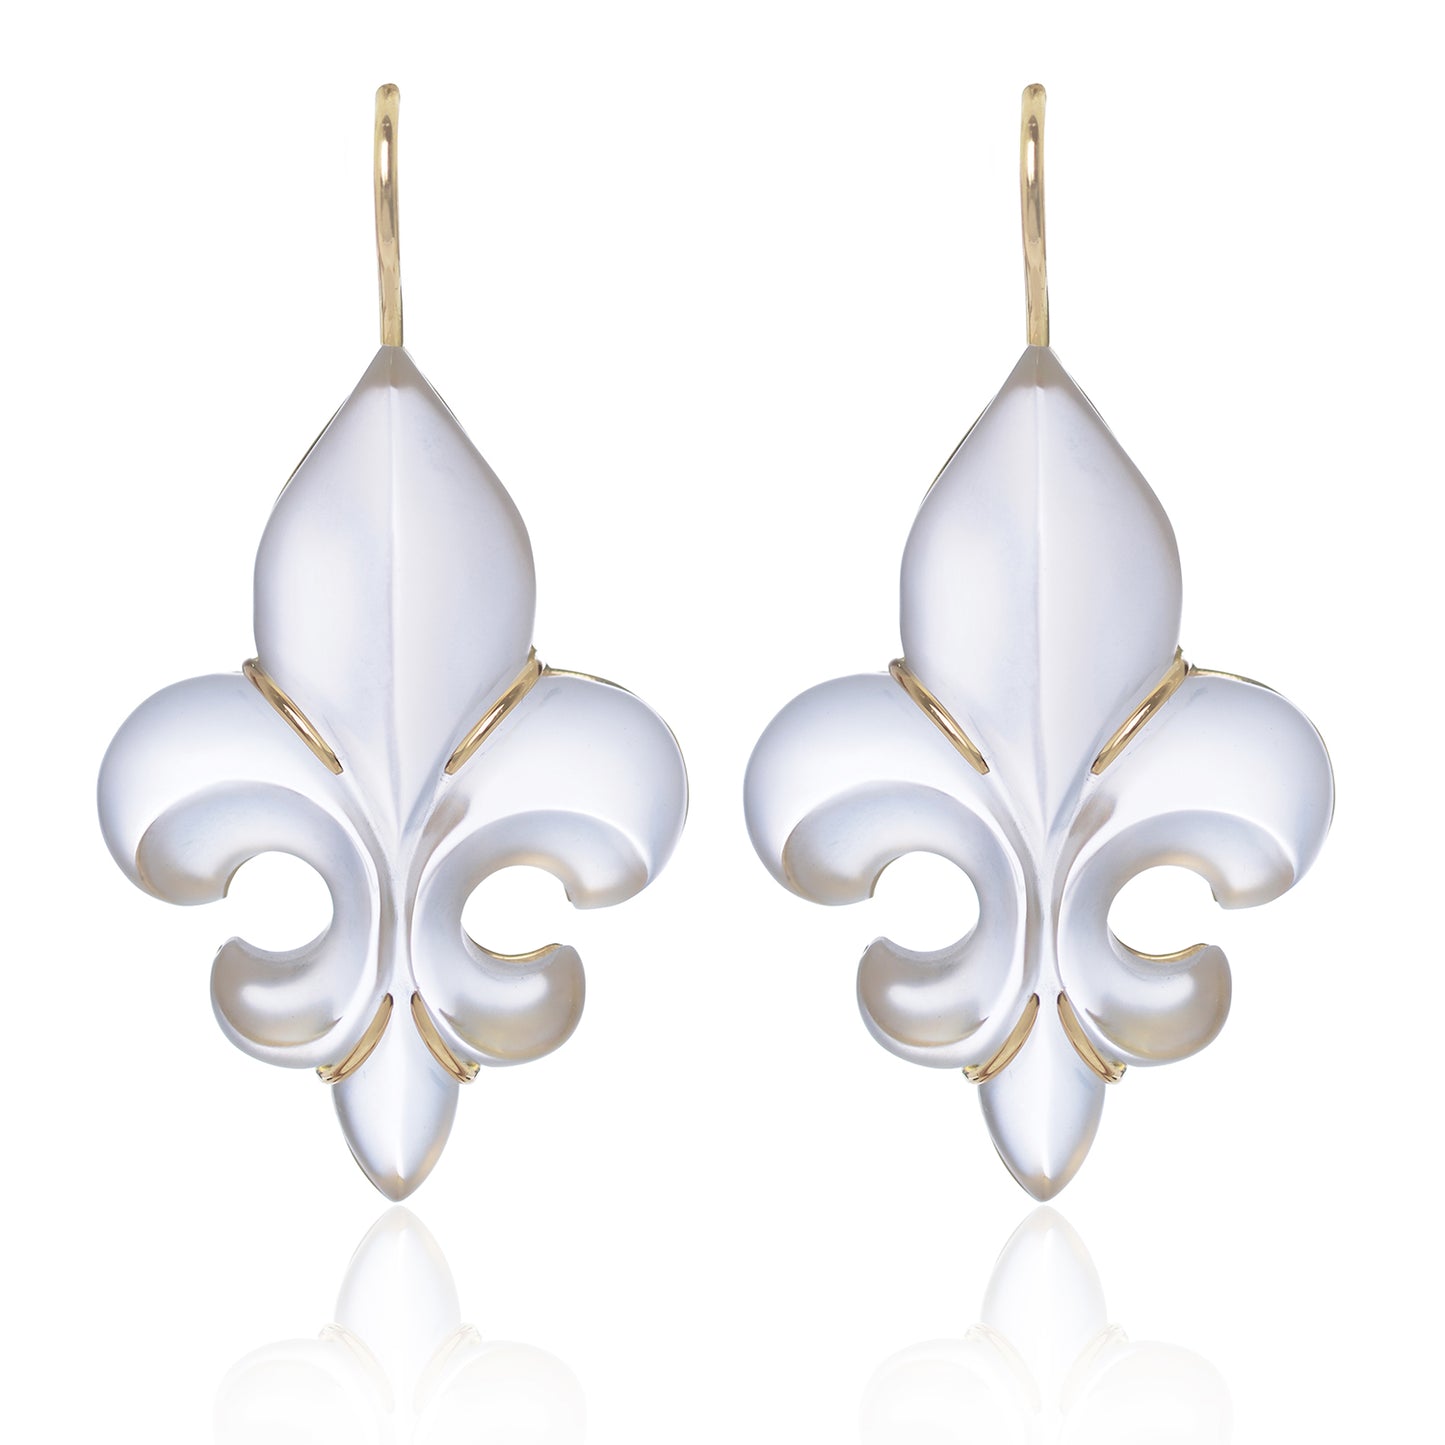 Frosted Fleur des Lys Earrings in 18ct yellow gold by McFarlane Fine Jewellery